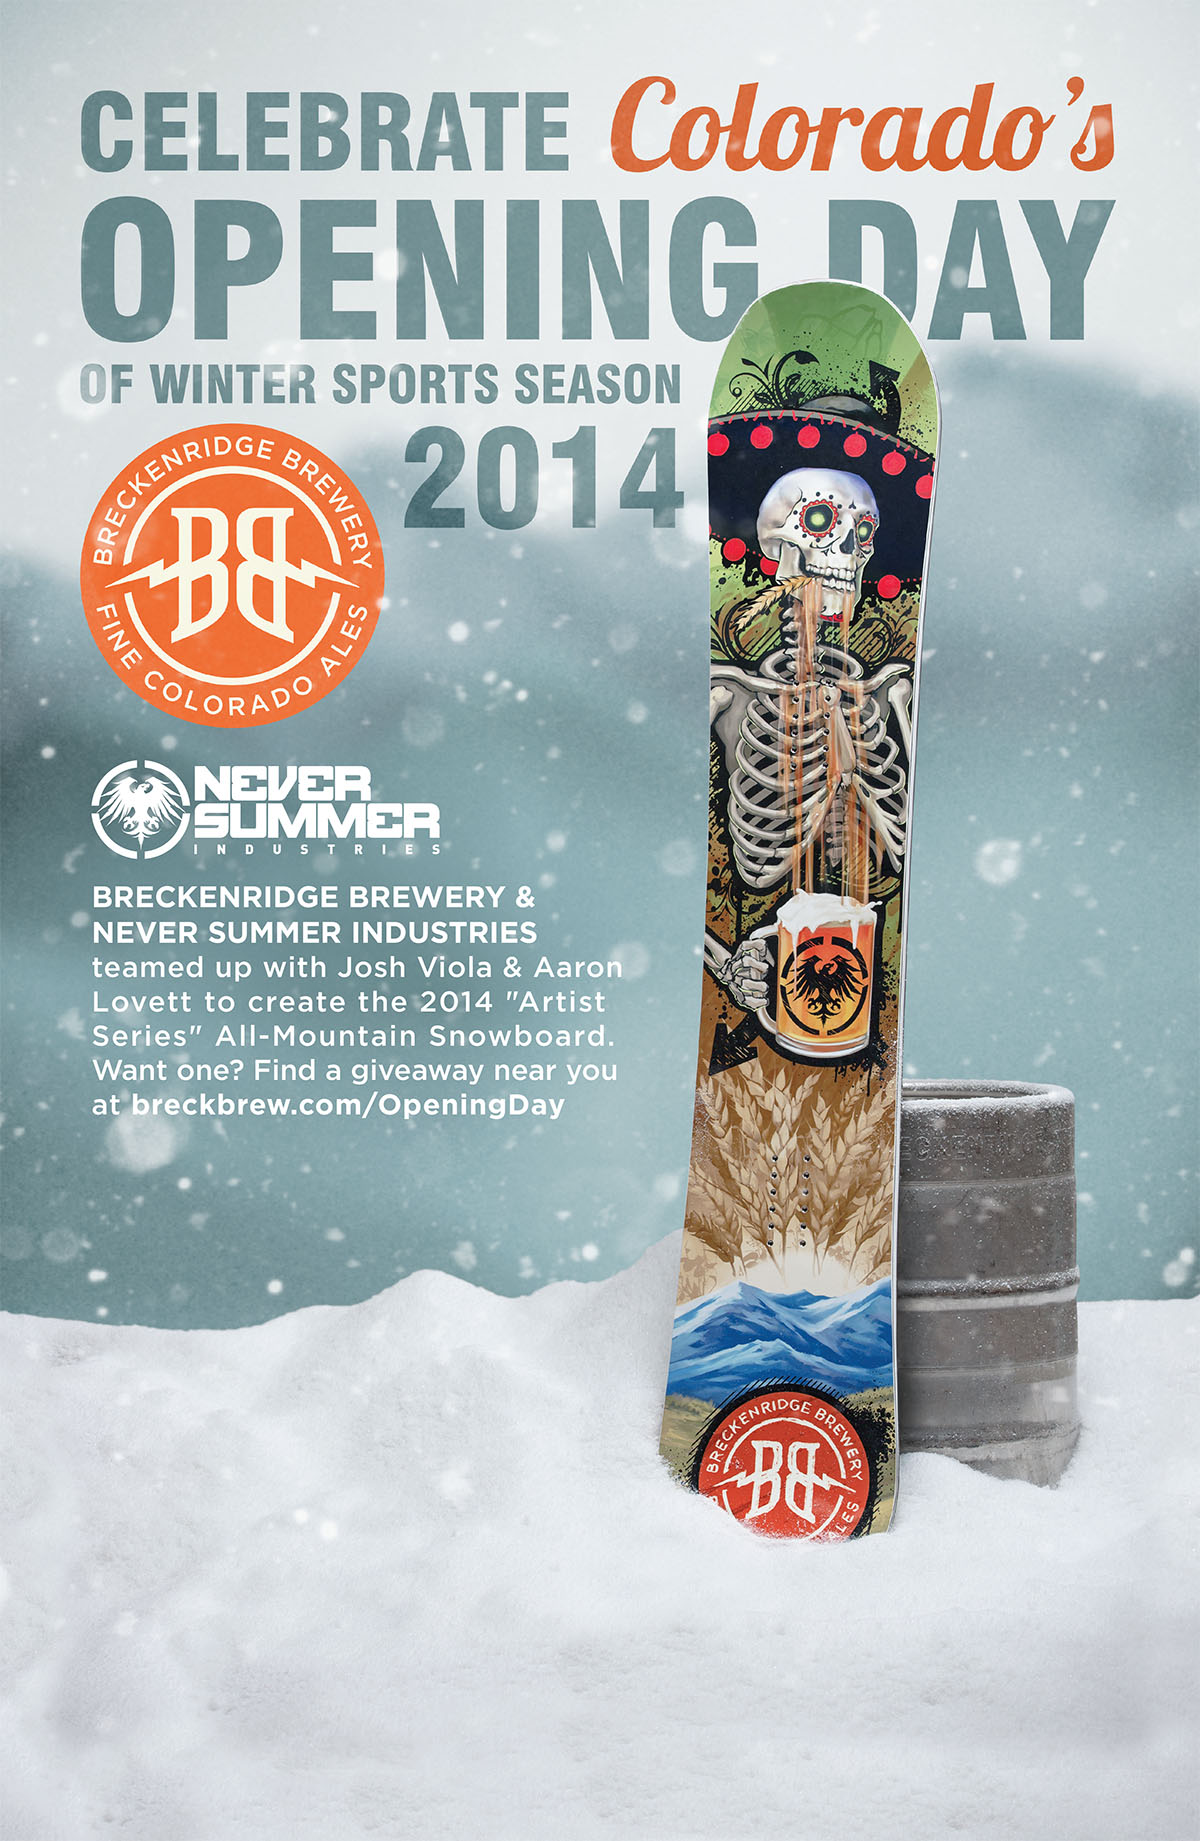 Breckenridge Brewery & Never Summer Industries Collaborate for Their